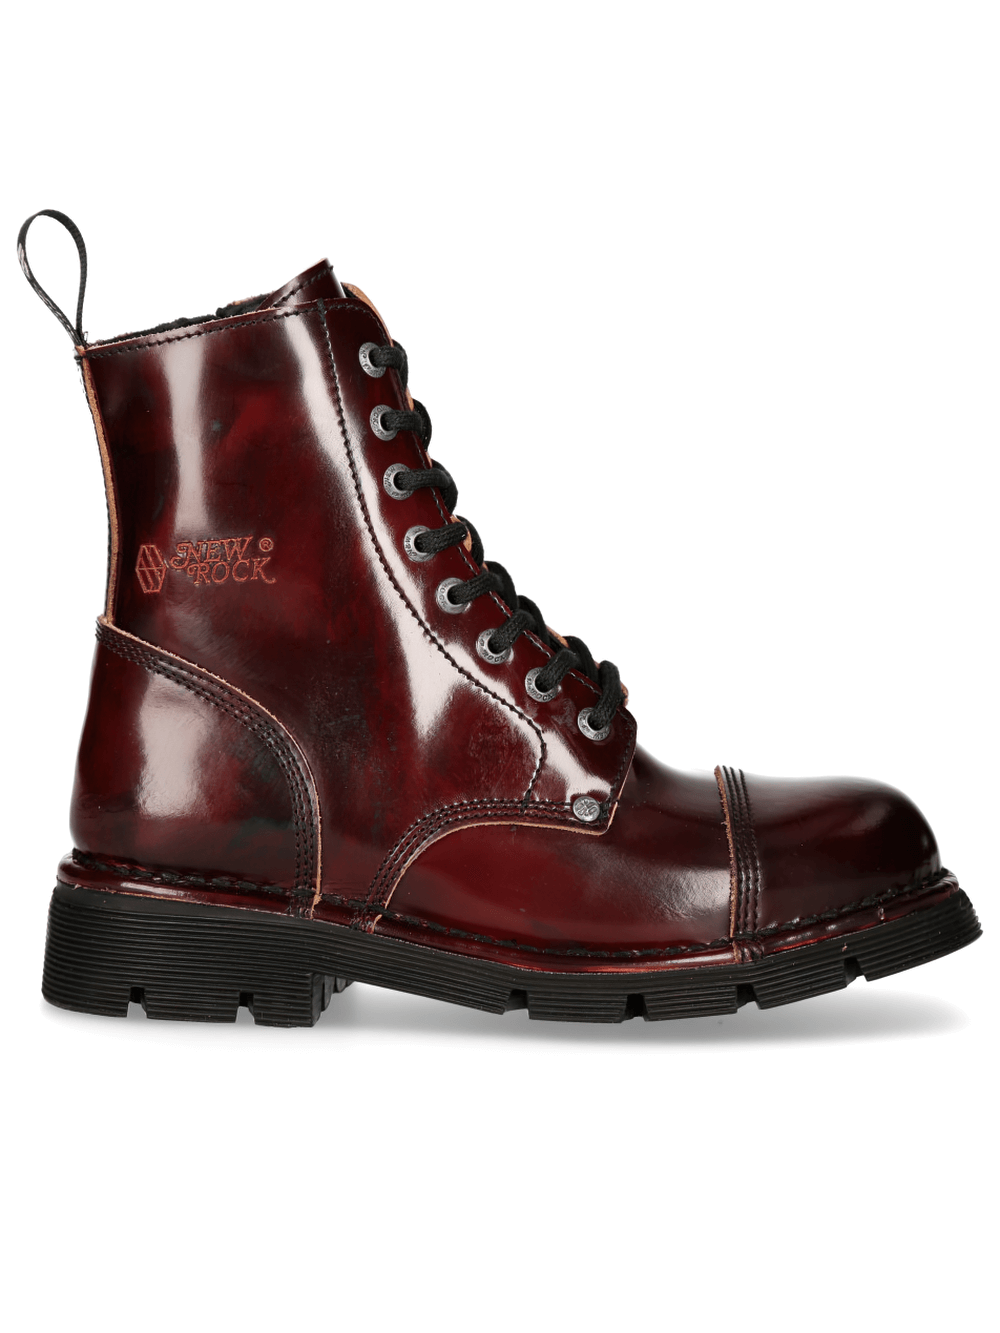 NEW ROCK Metallic Wine Red Punk Boots with Military Style